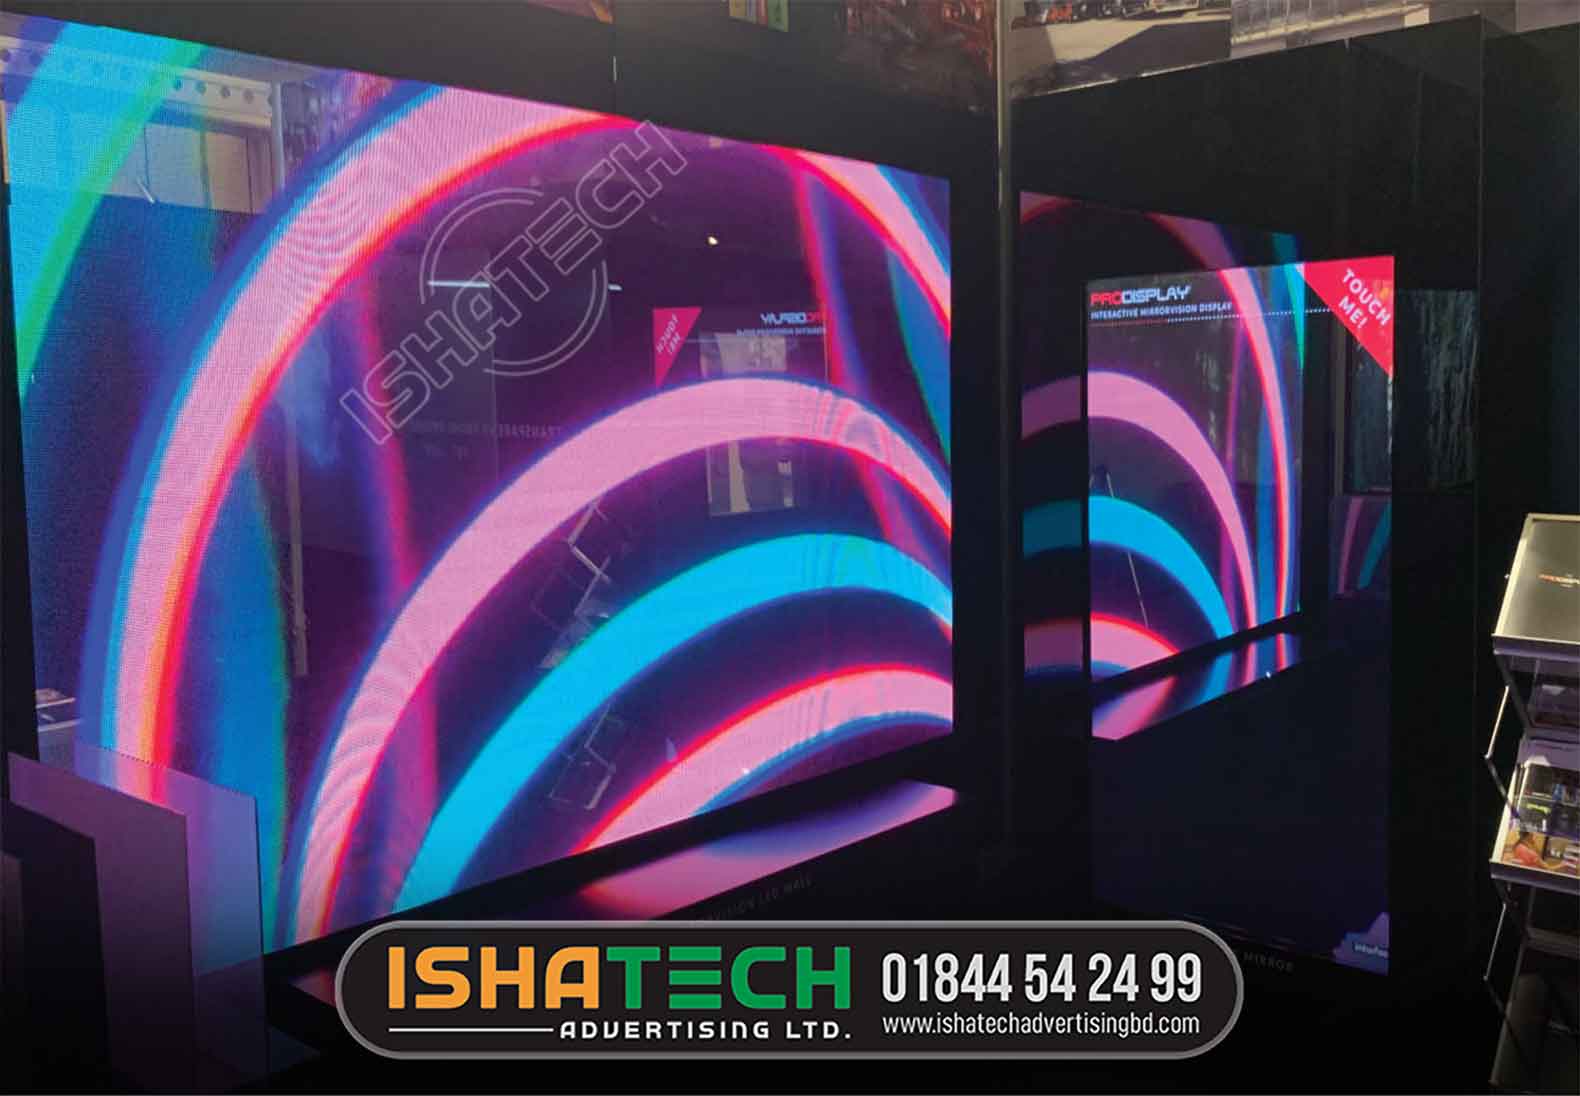 Rental LED Video Wall New Design Event Stage LED Display Indoor Outdoor P3.91 P4.81 Rental Video LED Wall importer, manufacturer and supplier company in Dhaka Bangladesh